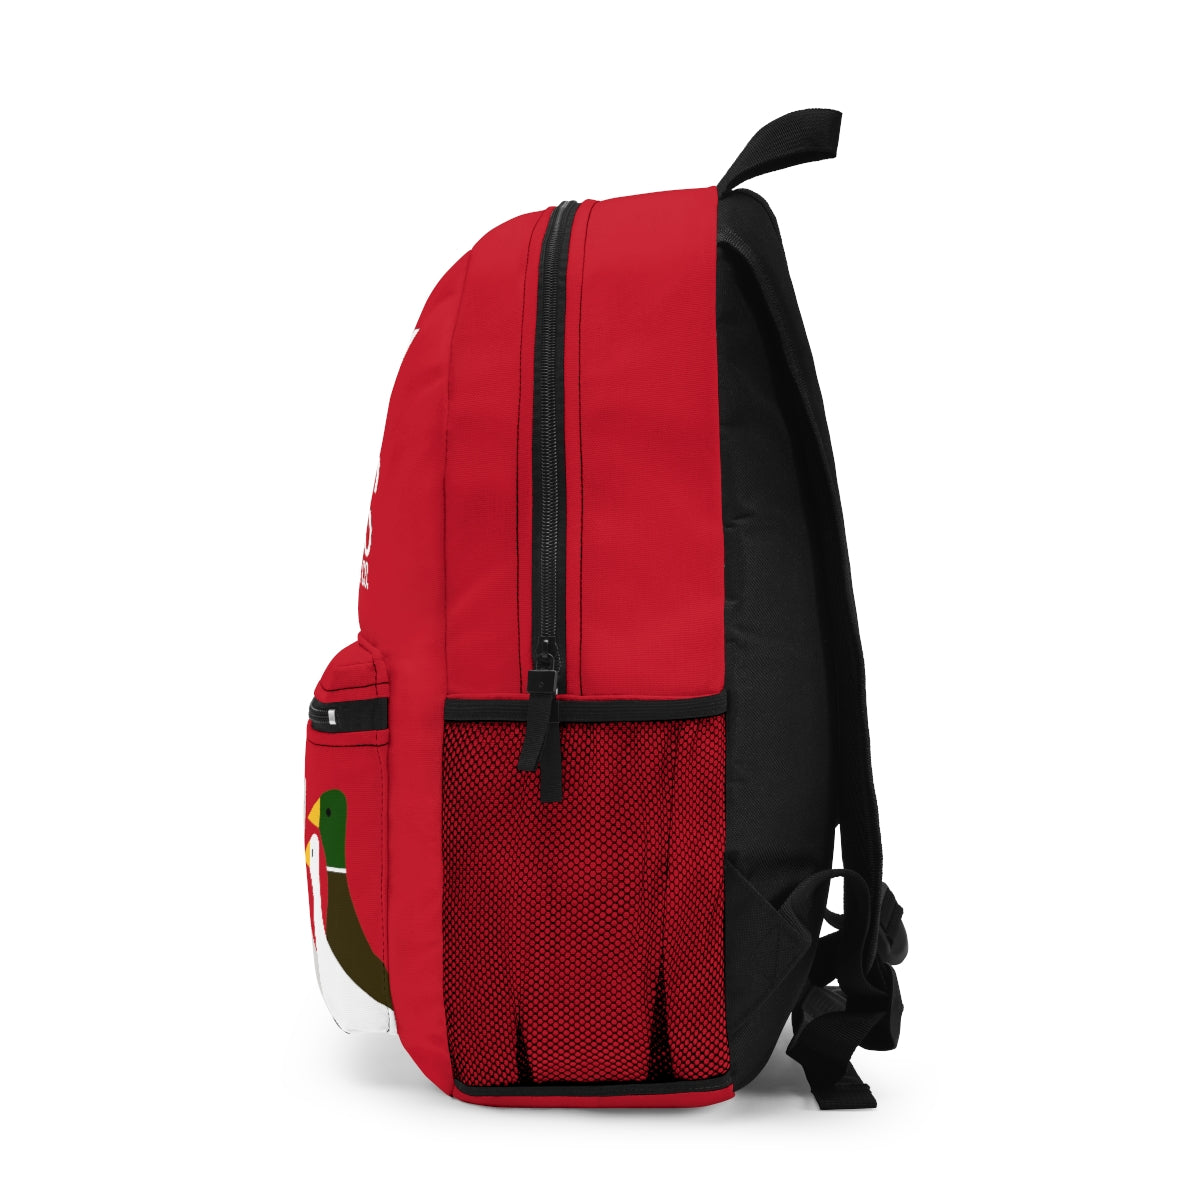 Nifty Ducks Co. Logo2 - red - Backpack